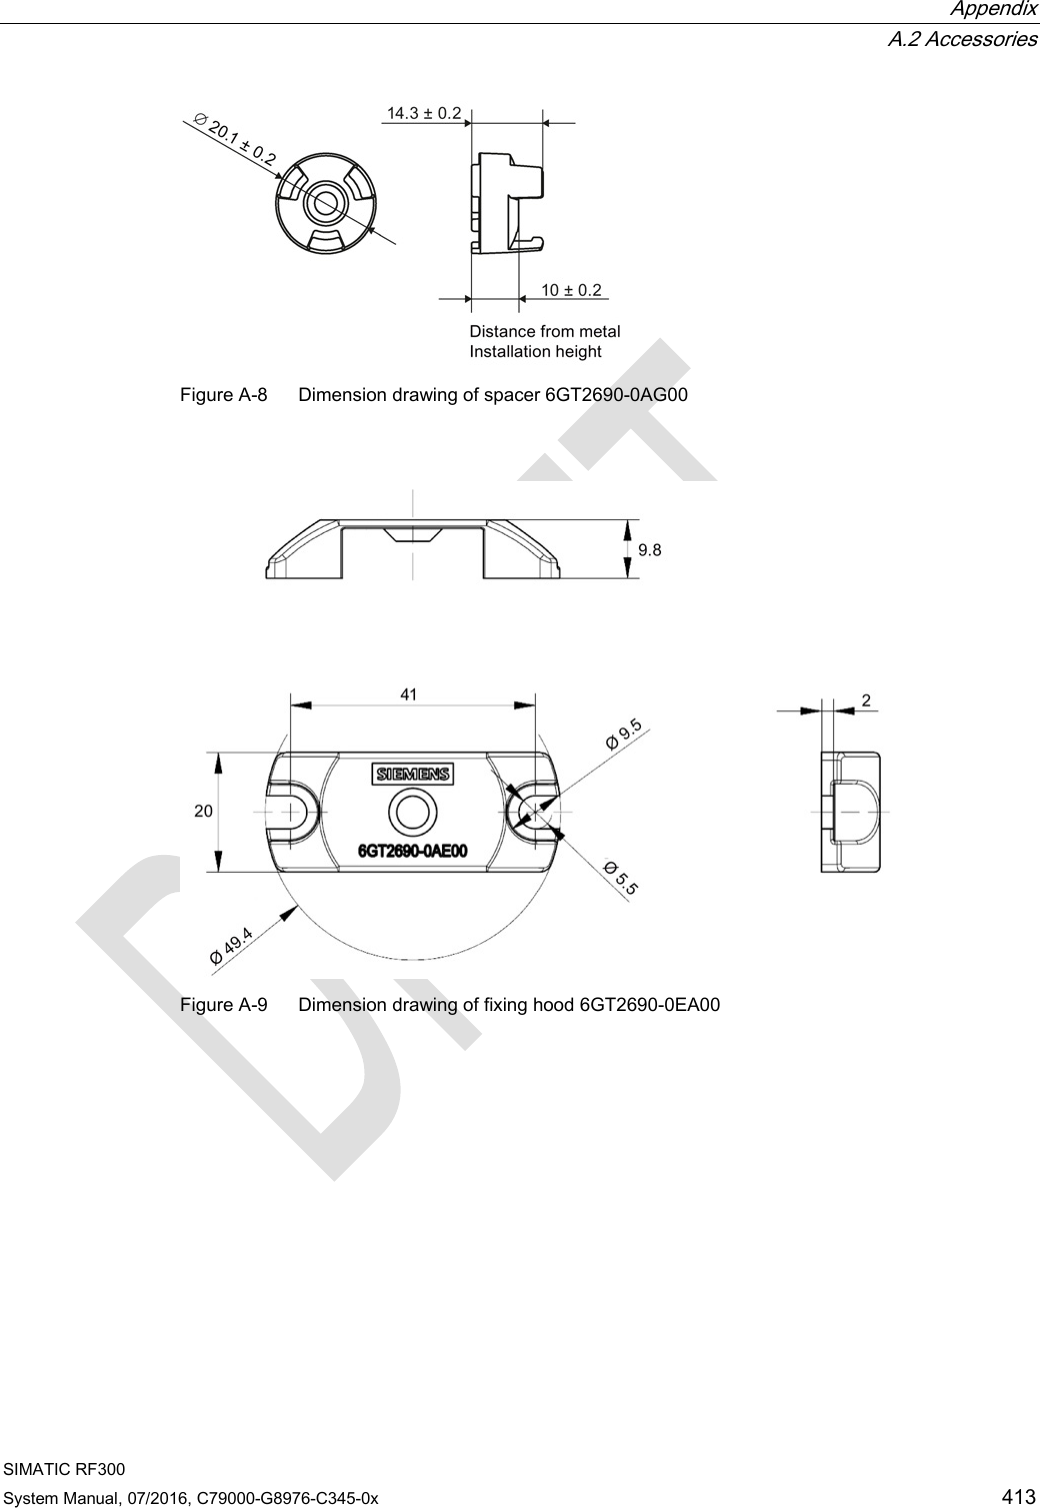  Appendix  A.2 Accessories SIMATIC RF300 System Manual, 07/2016, C79000-G8976-C345-0x 413  Figure A-8  Dimension drawing of spacer 6GT2690-0AG00   Figure A-9  Dimension drawing of fixing hood 6GT2690-0EA00 